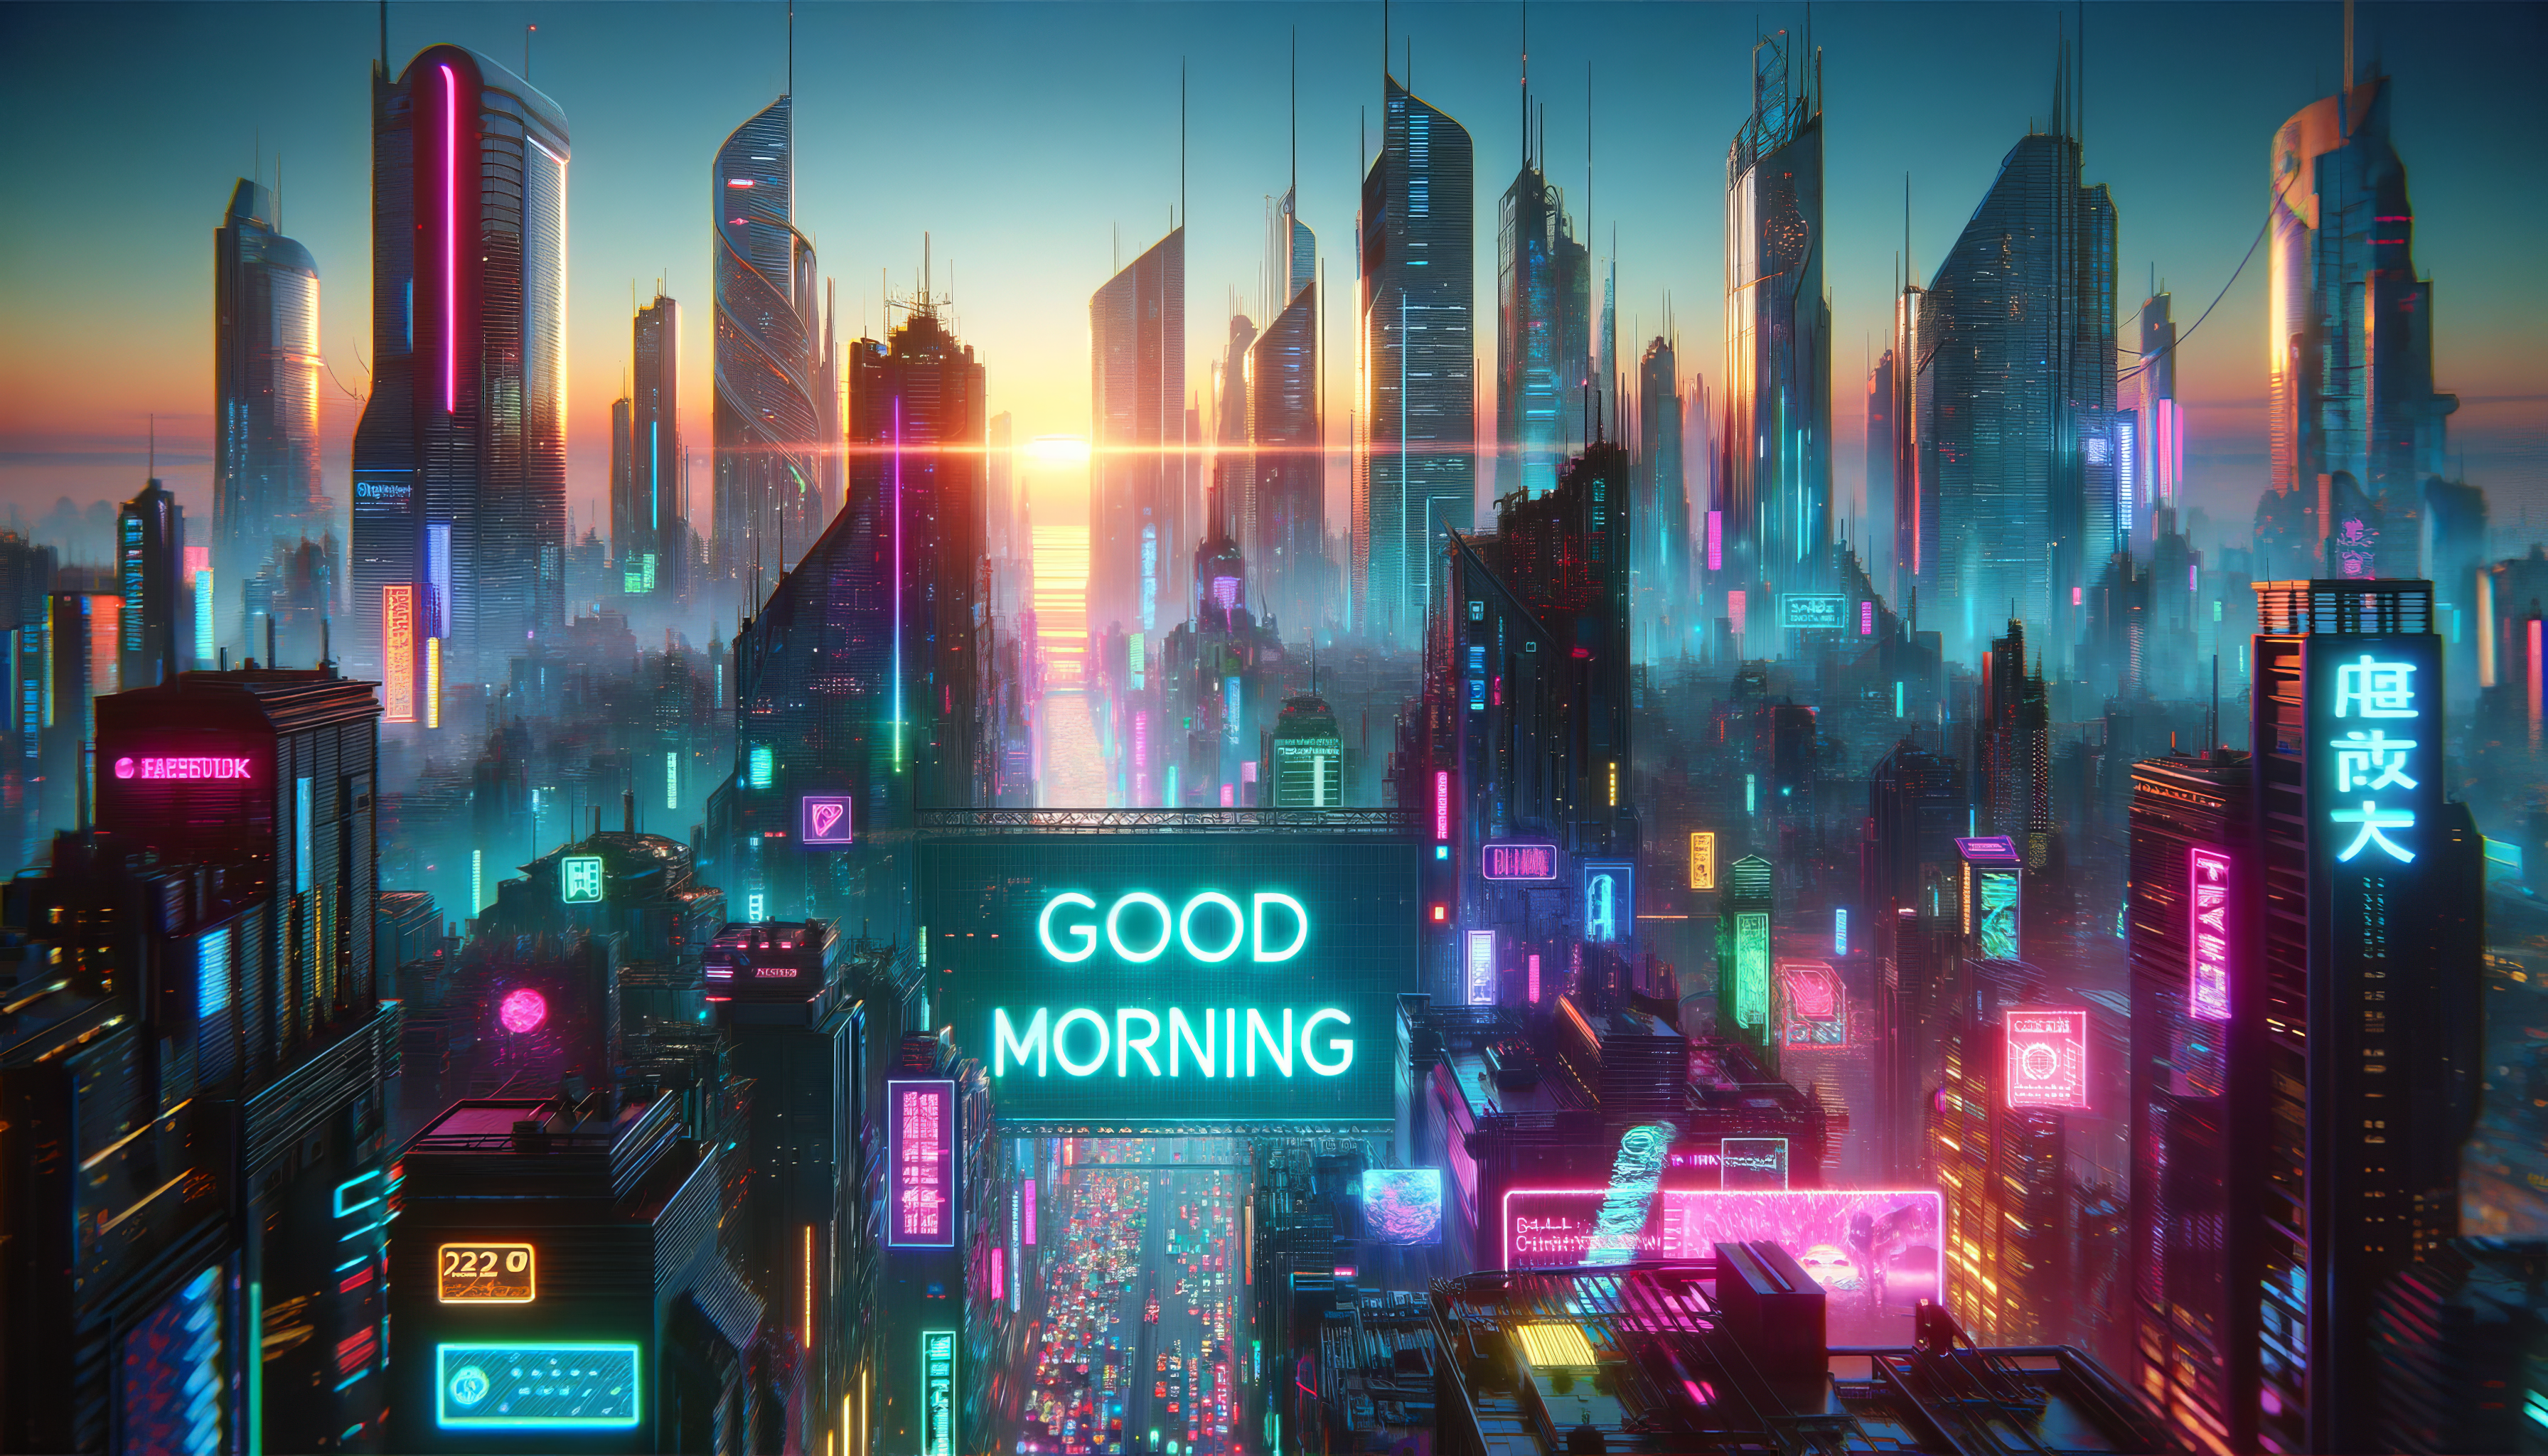 Good morning greeting over a vibrant, futuristic cityscape at sunrise for an HD desktop wallpaper.